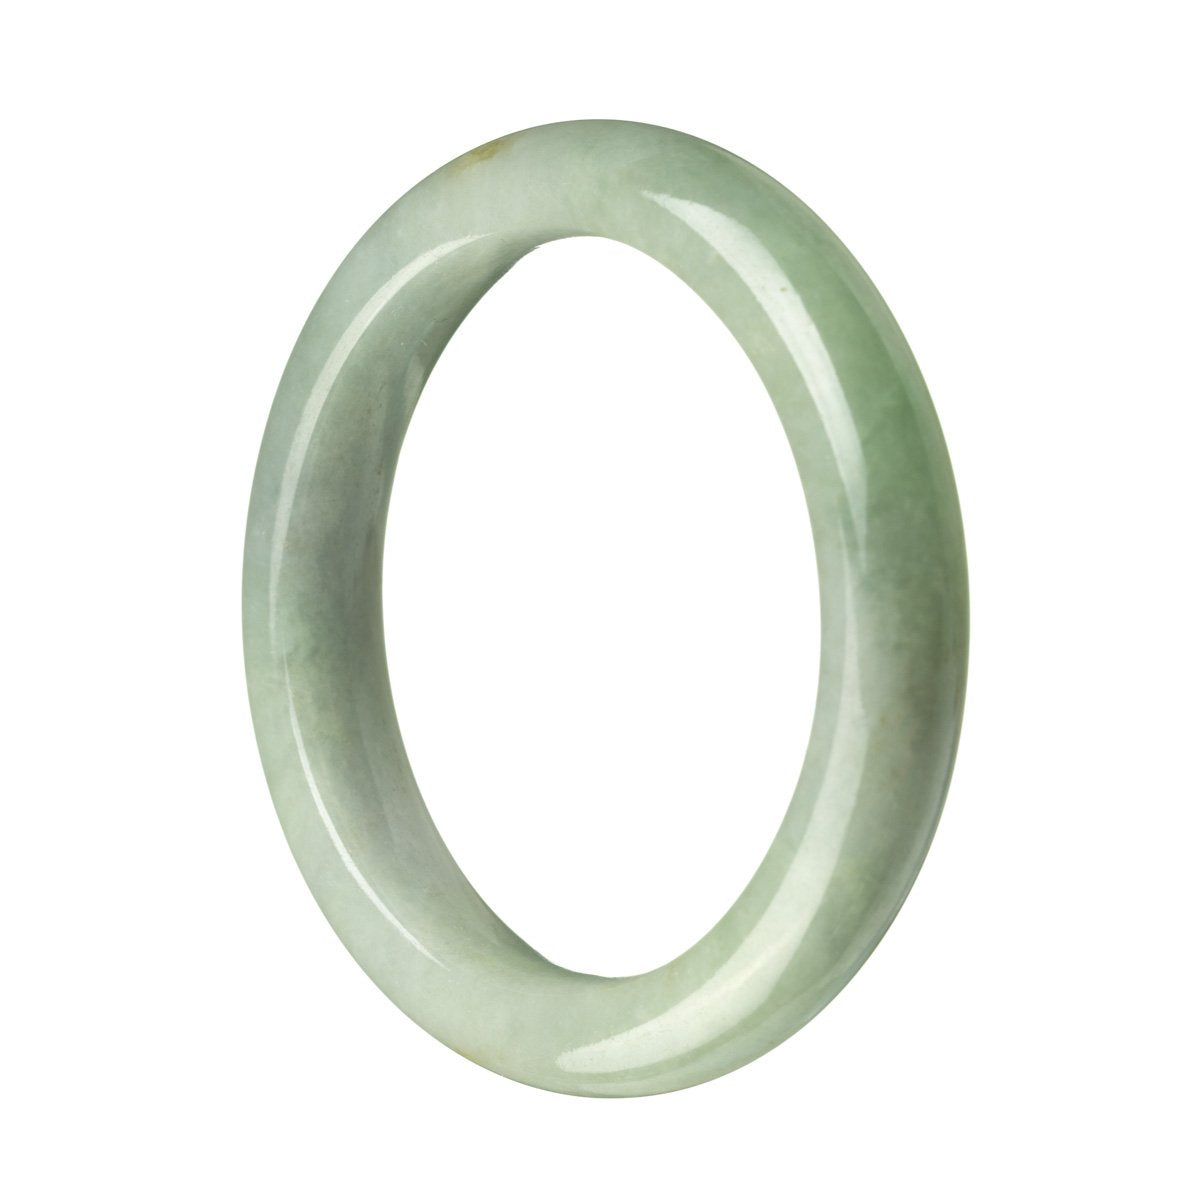 A close-up image of a Grade A Green Jadeite bangle bracelet with a semi-round shape, measuring 58mm in diameter. The bracelet is certified and features a vibrant green color. It is a beautiful piece of jewelry from MAYS GEMS.